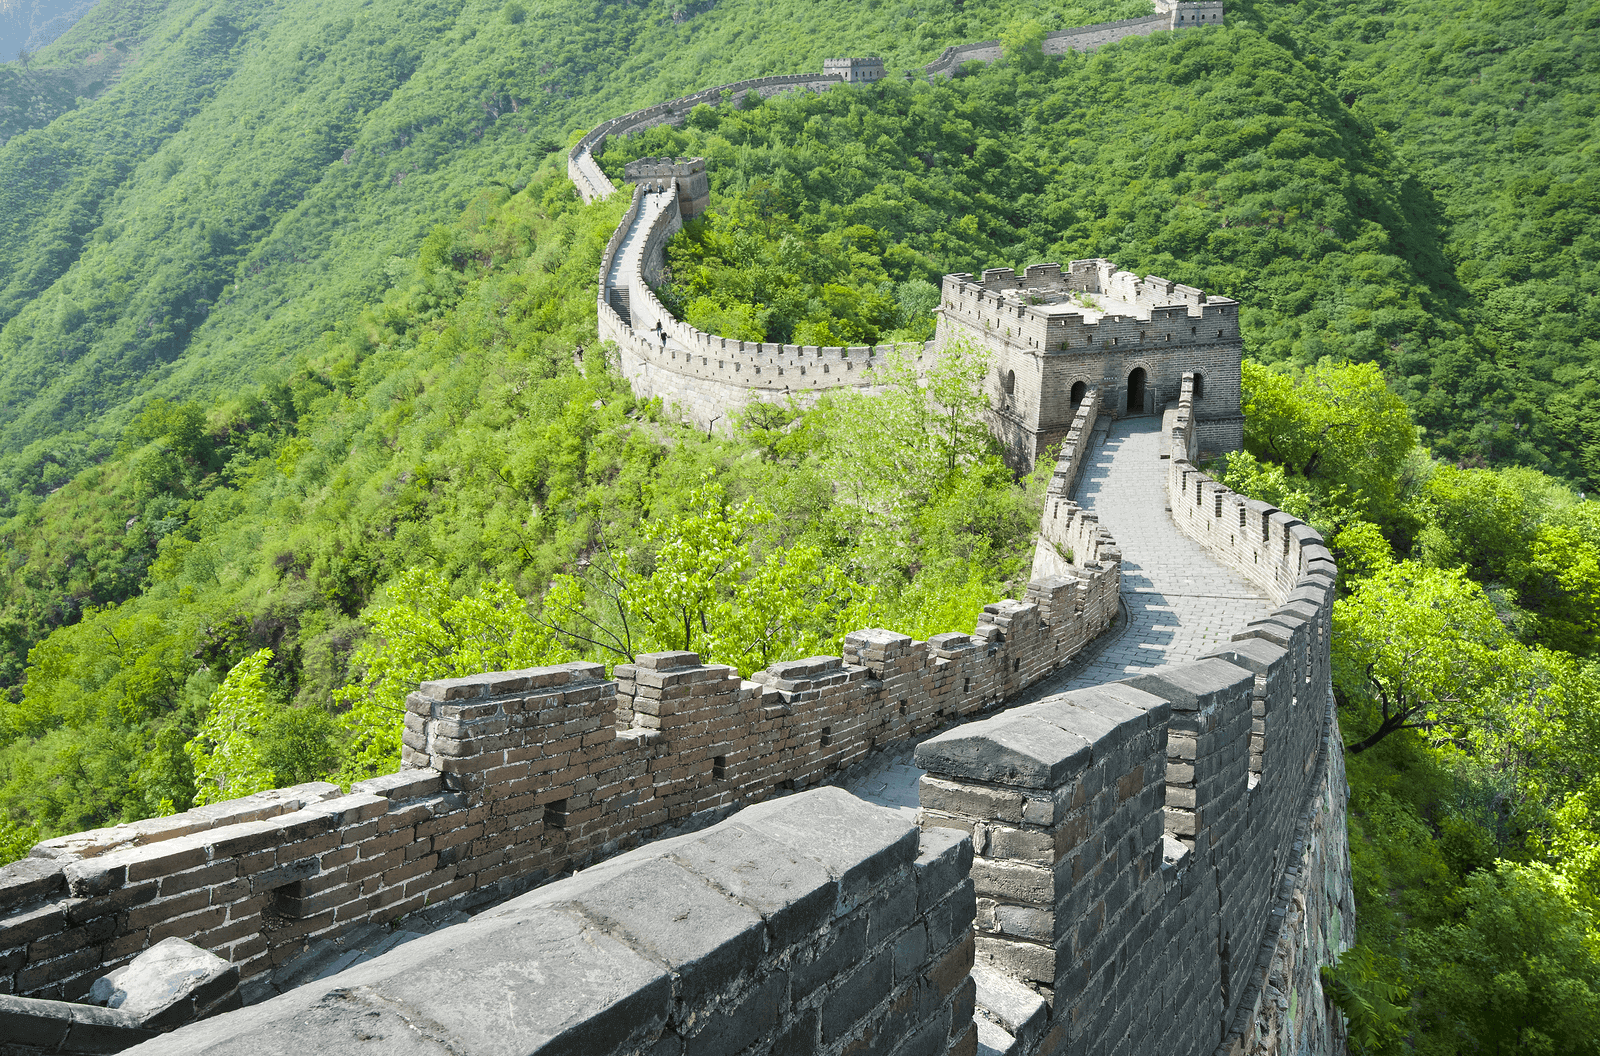  Great  Wall  of China   Resources  Surfnetkids